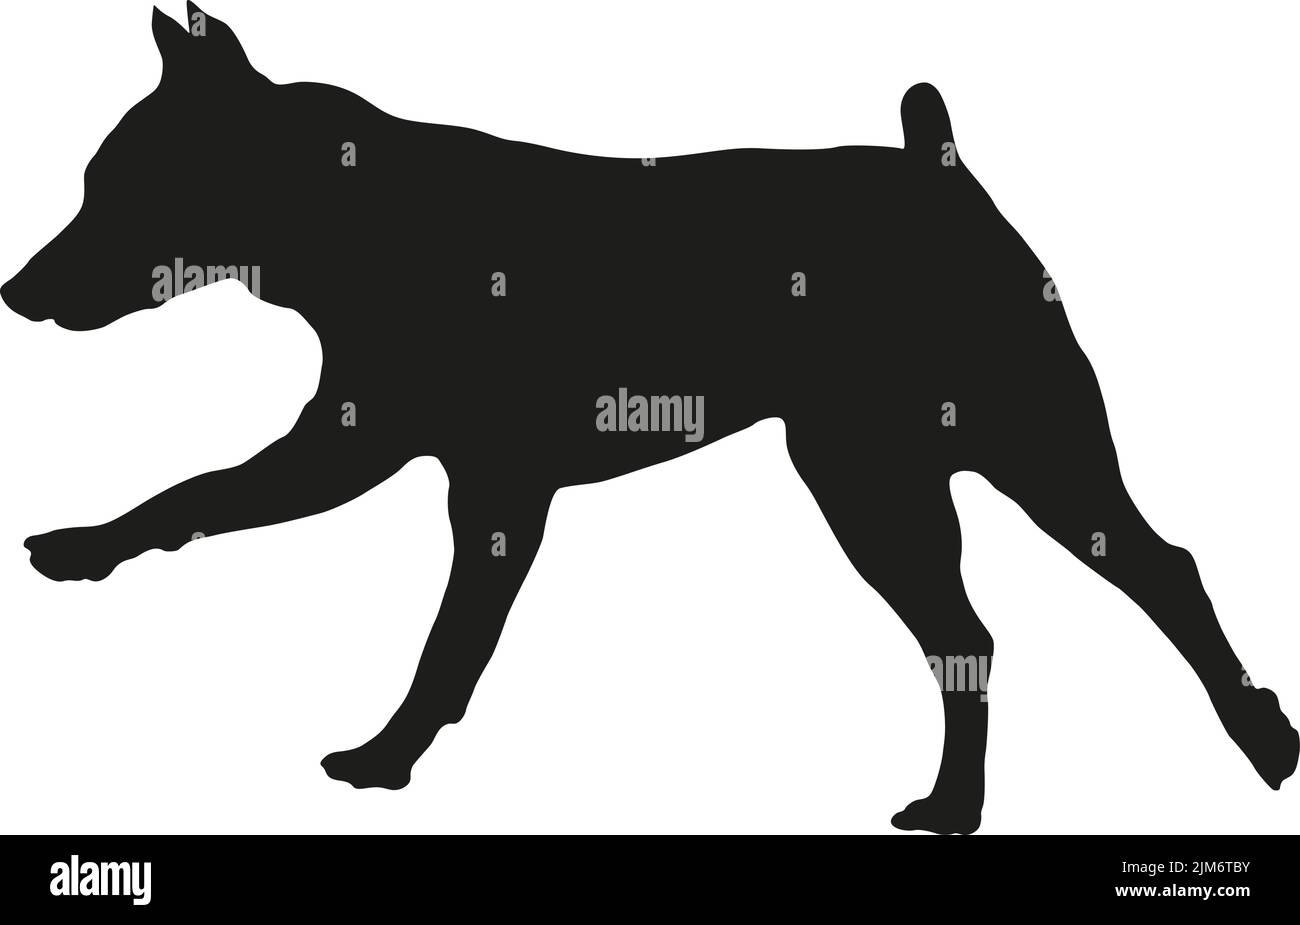 Black dog silhouette. Running and jumping miniature pinscher puppy. Pet animals. Isolated on a white background. Vector illustration. Stock Vector